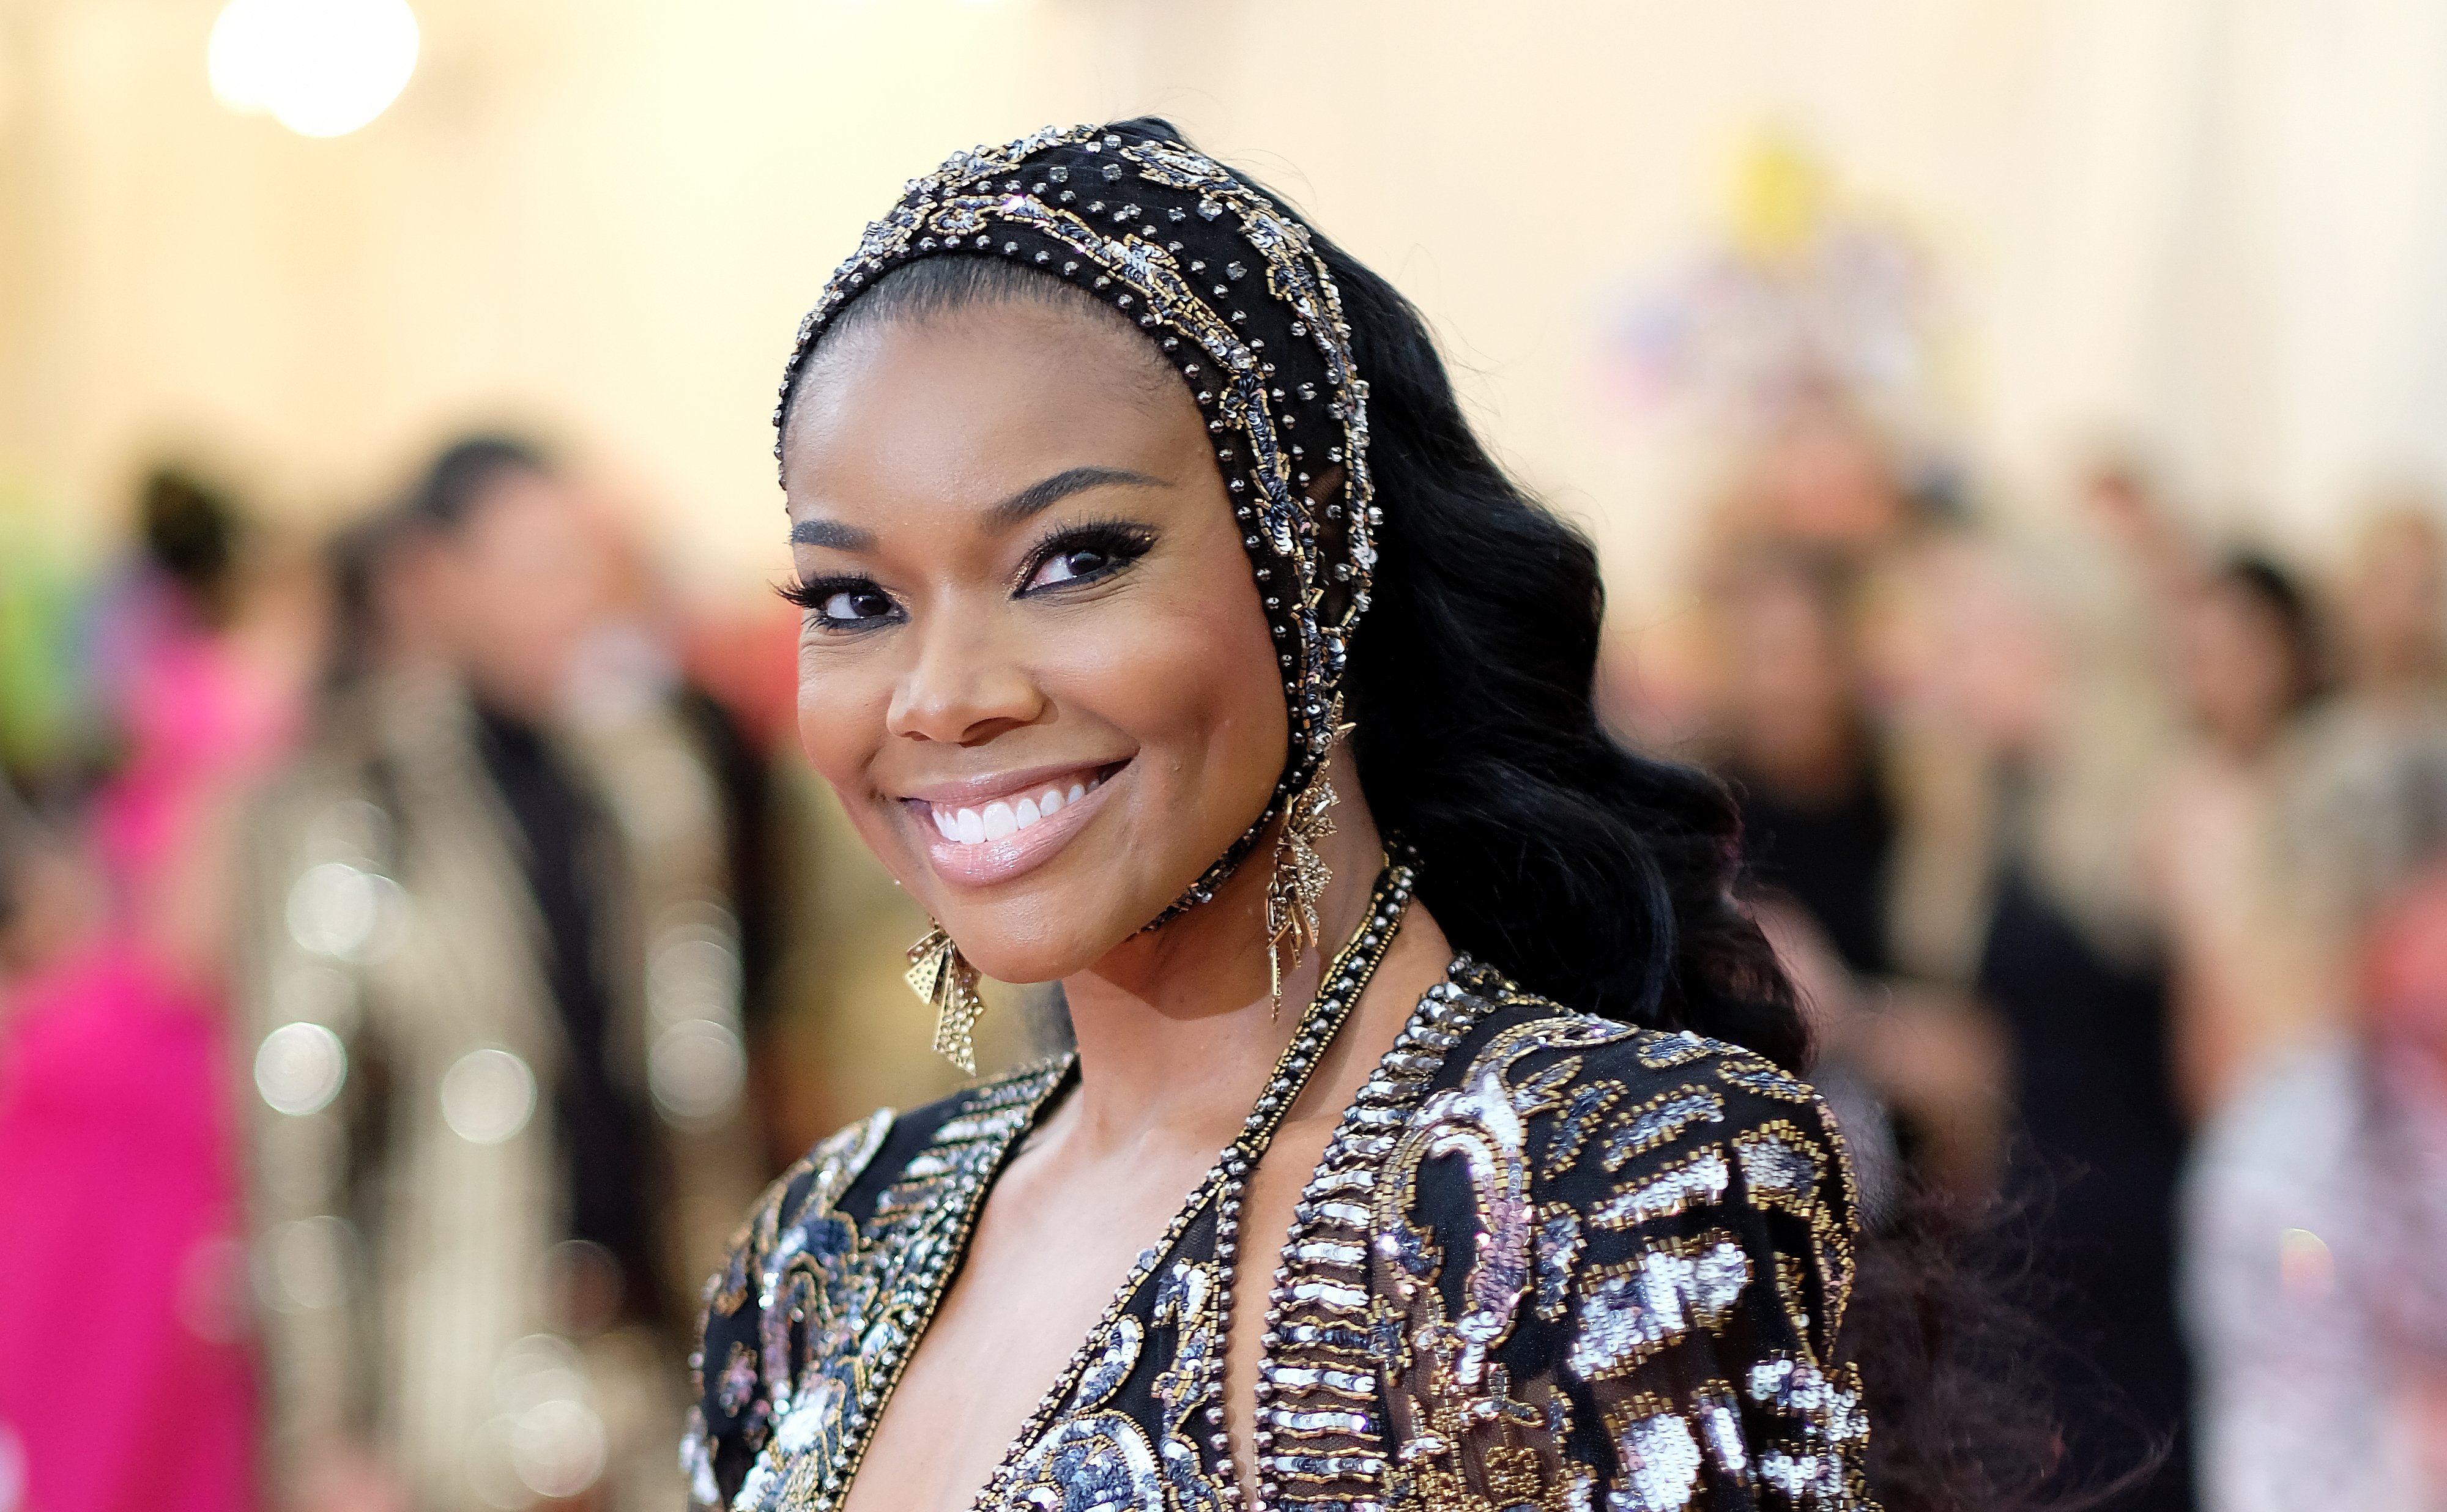 Gabrielle Union attends the 2019 Met Gala "Celebrating Camp: Notes on Fashion" at Metropolitan Museum of Art on May 06, 2019 in New York City. | Source: Getty Images